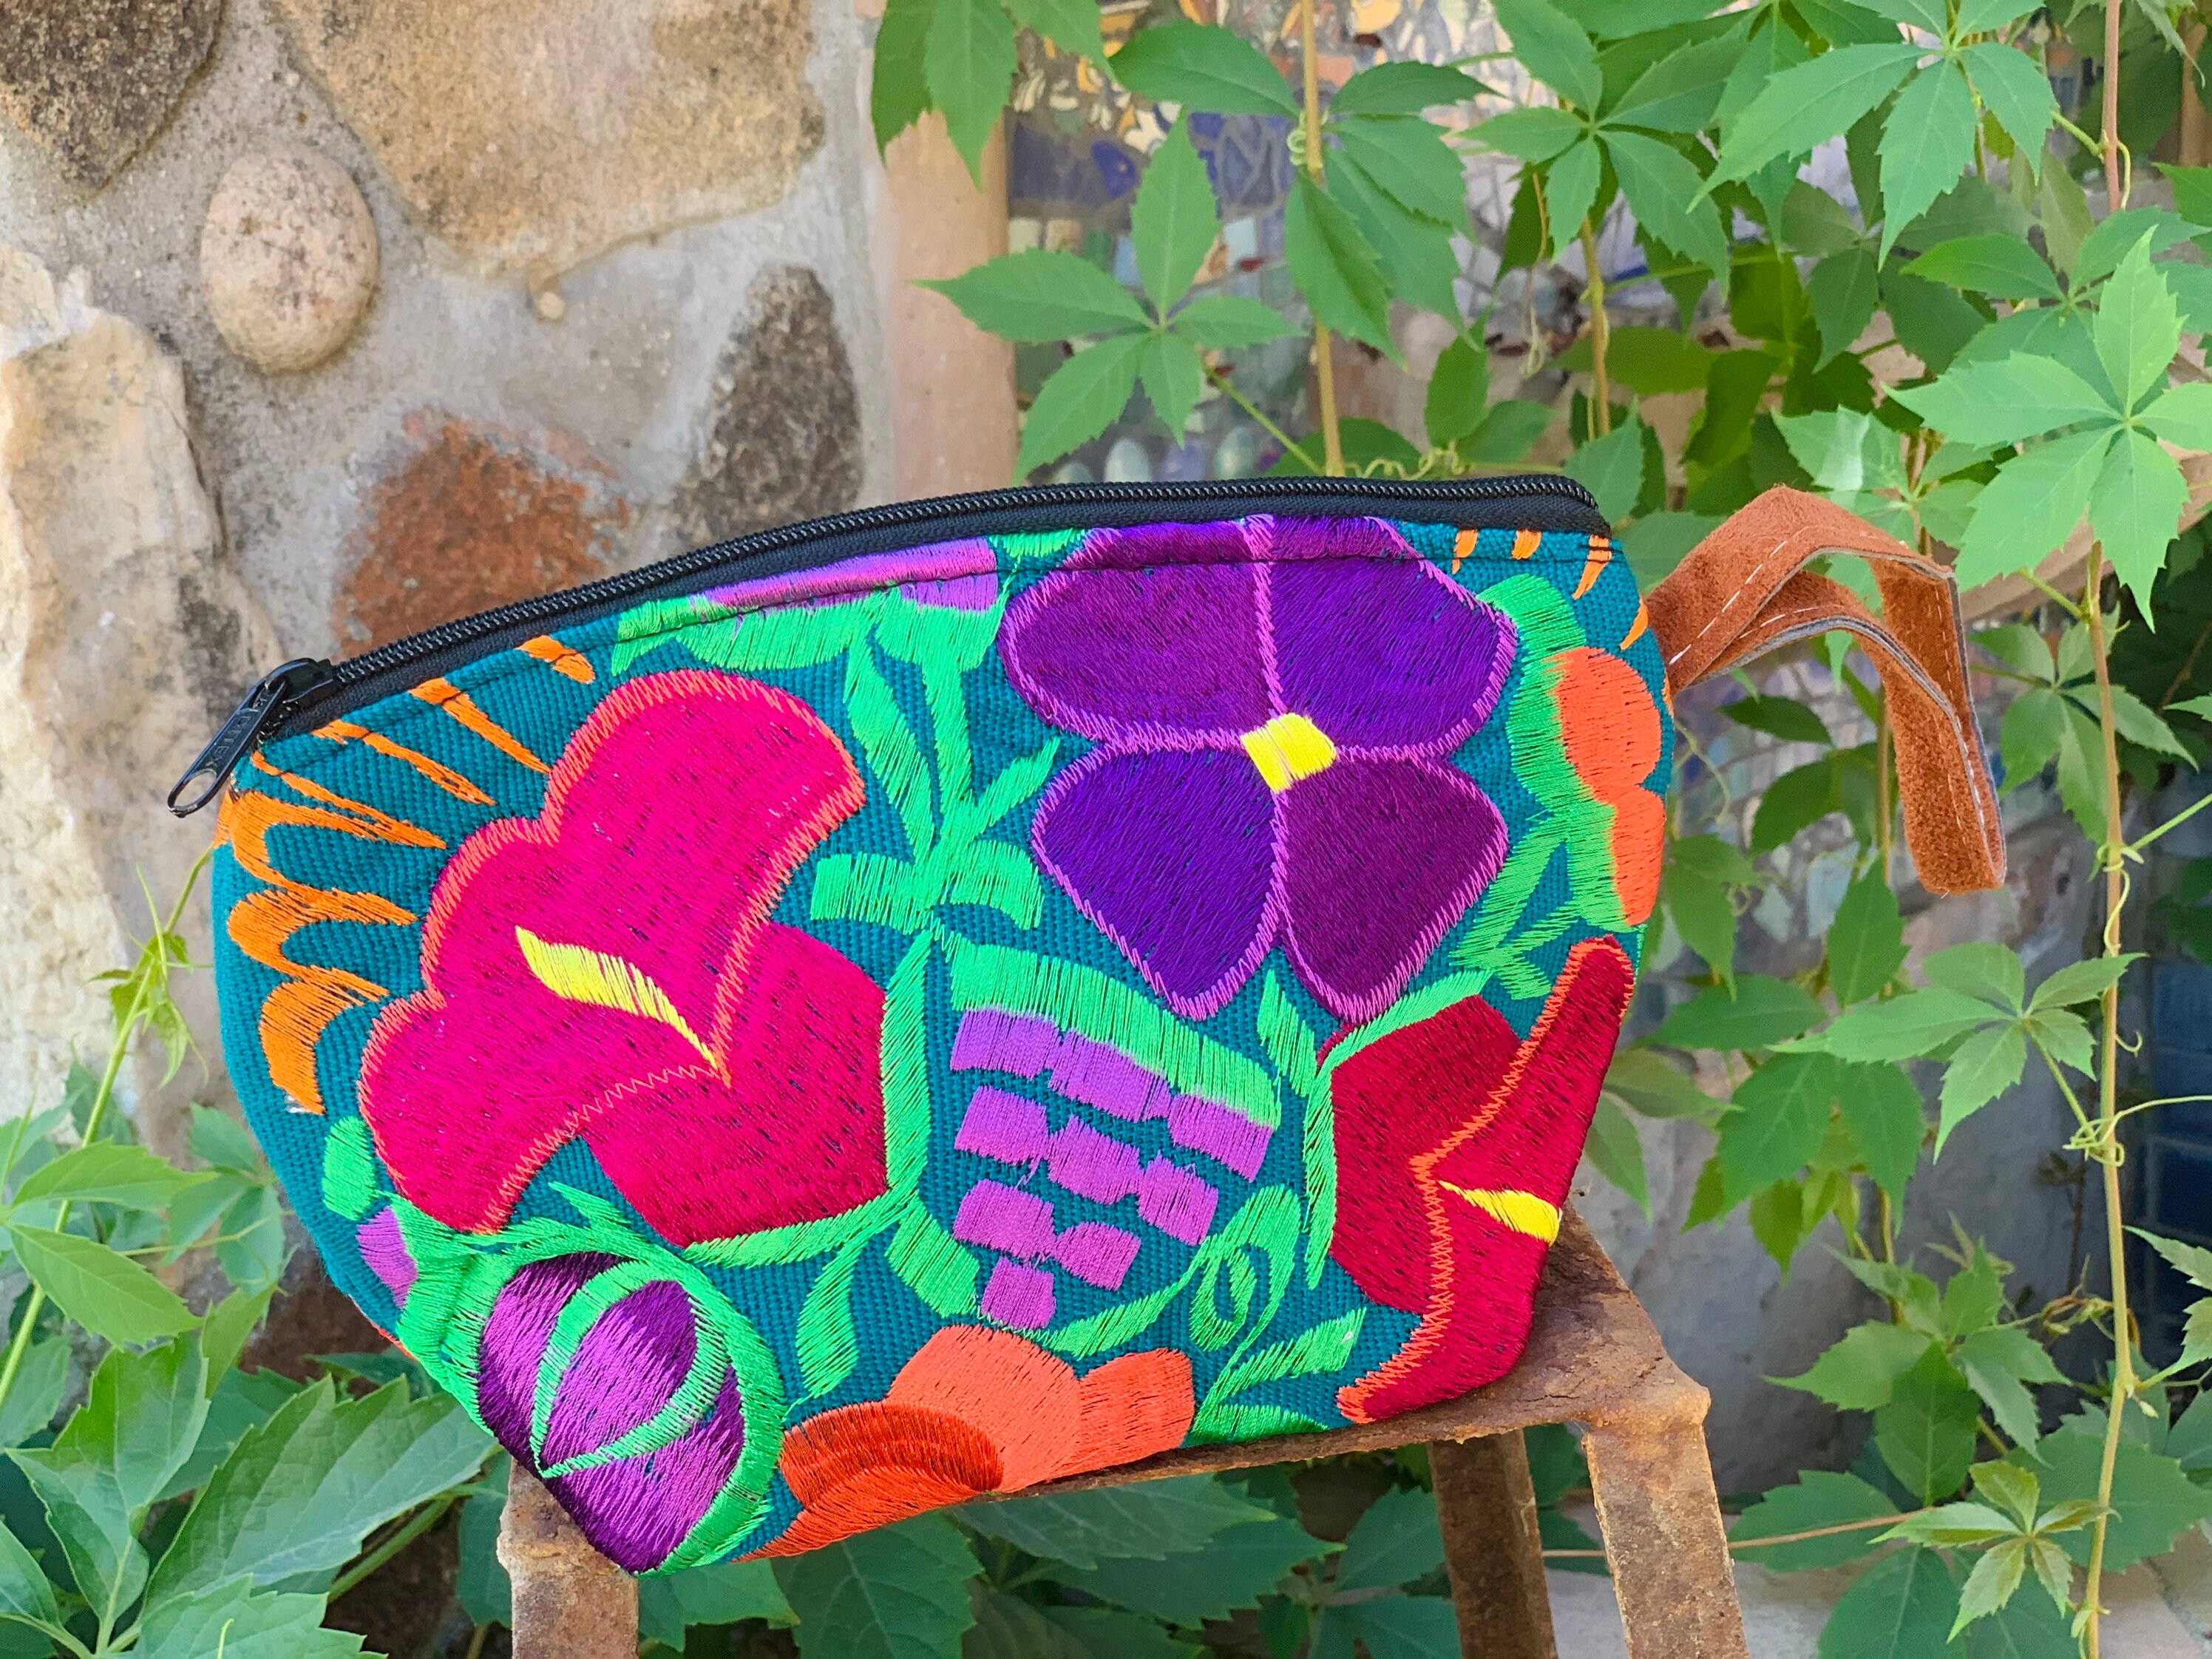 Embroidered Clutch-Bag-Purse-Vintage Huipil-Handmade-Gift Ideas-Mexican Pouch-Cartera-Magnet Clousure-Boho-Gifts for Her-Tassel-Fiesta Bday